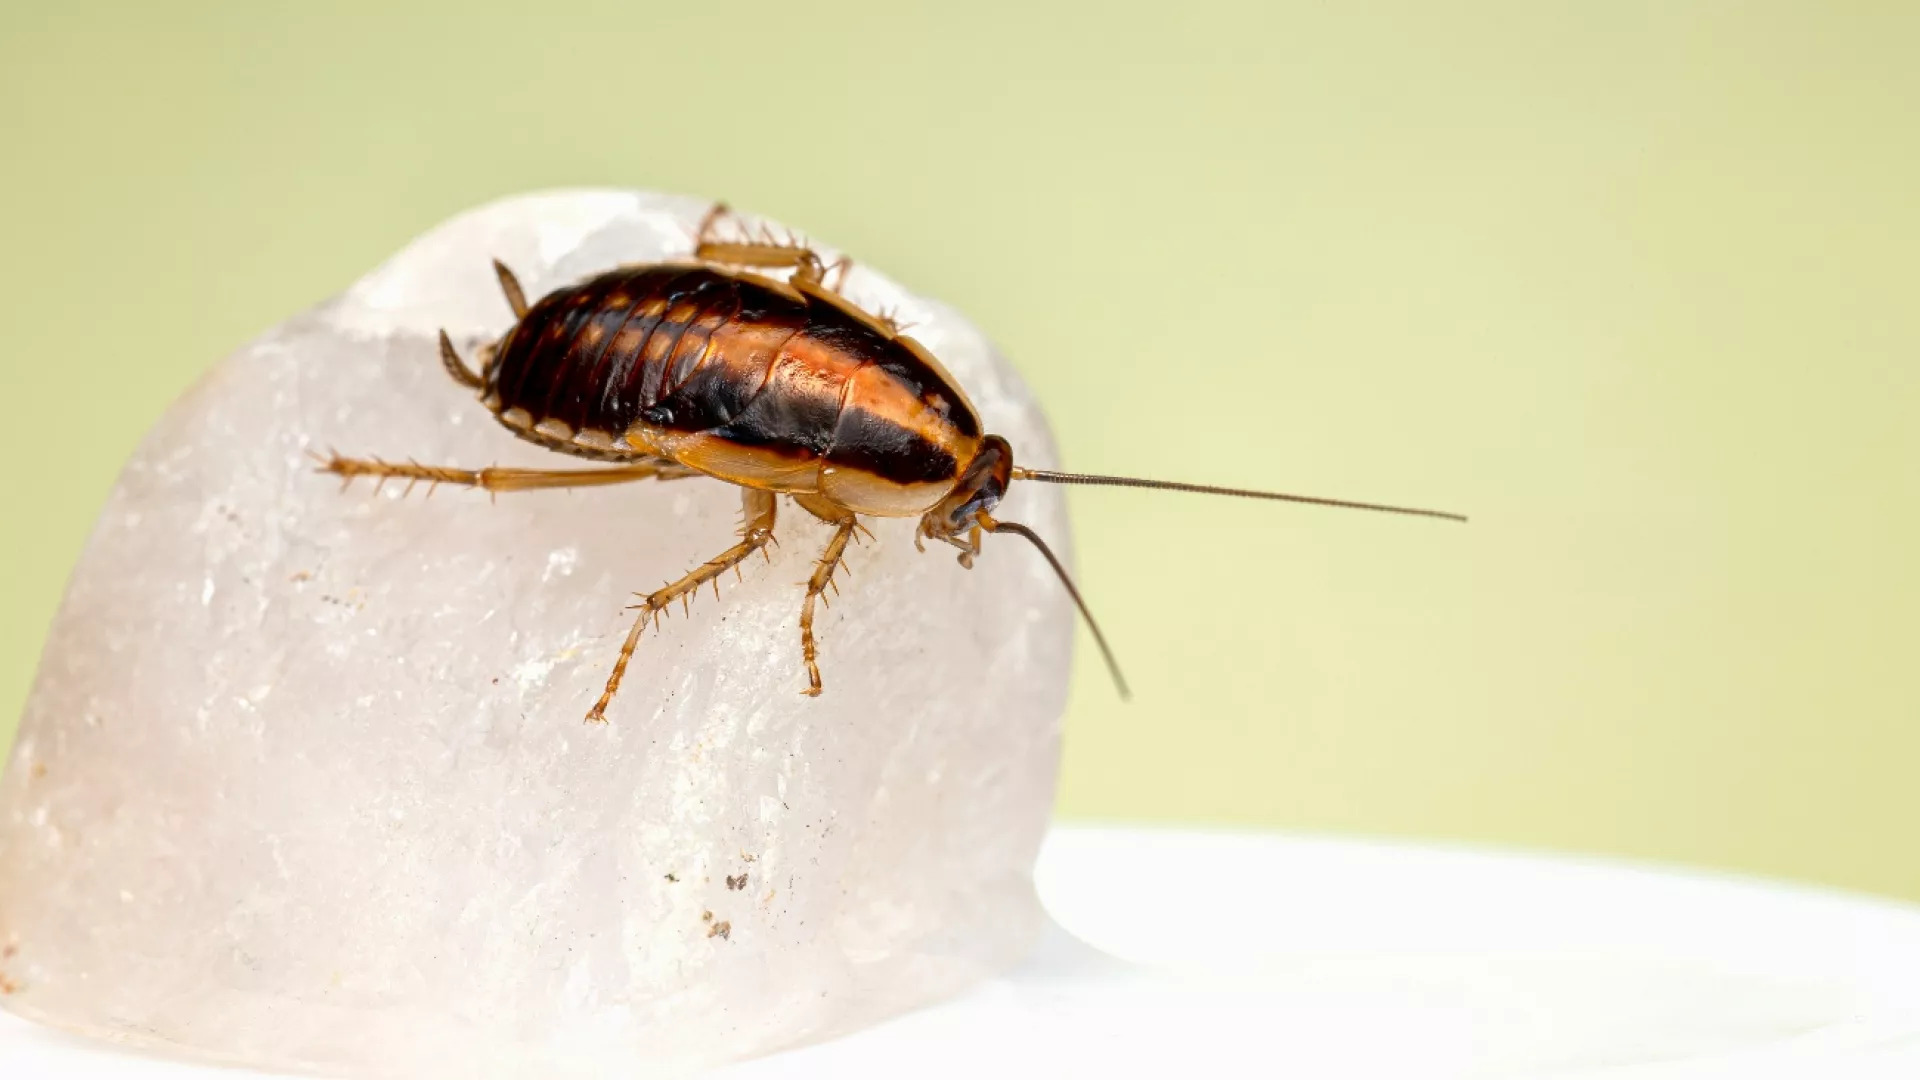 Cockroach infestations are up by a third in Spain: Is climate change to blame?